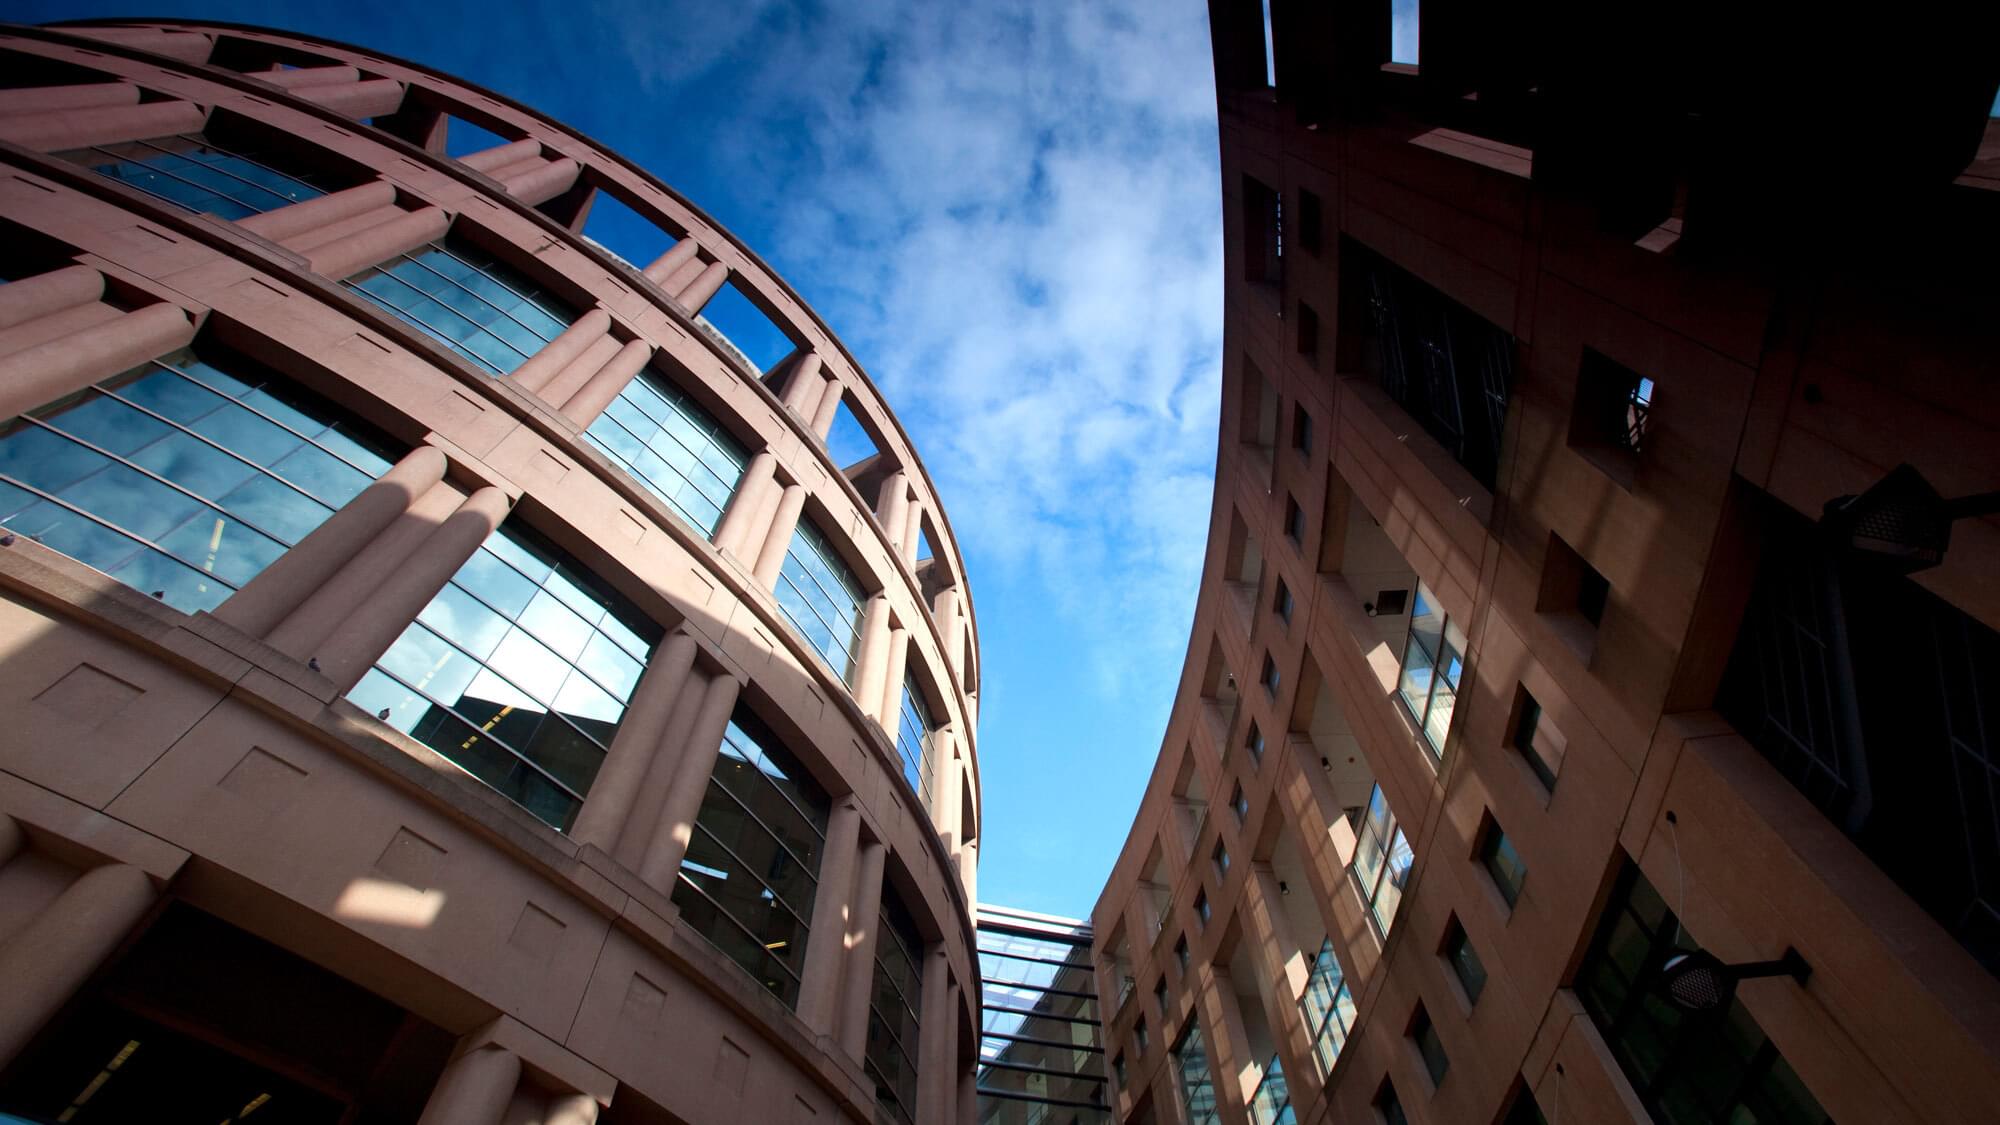 The modern design of the Vancouver Public Library.